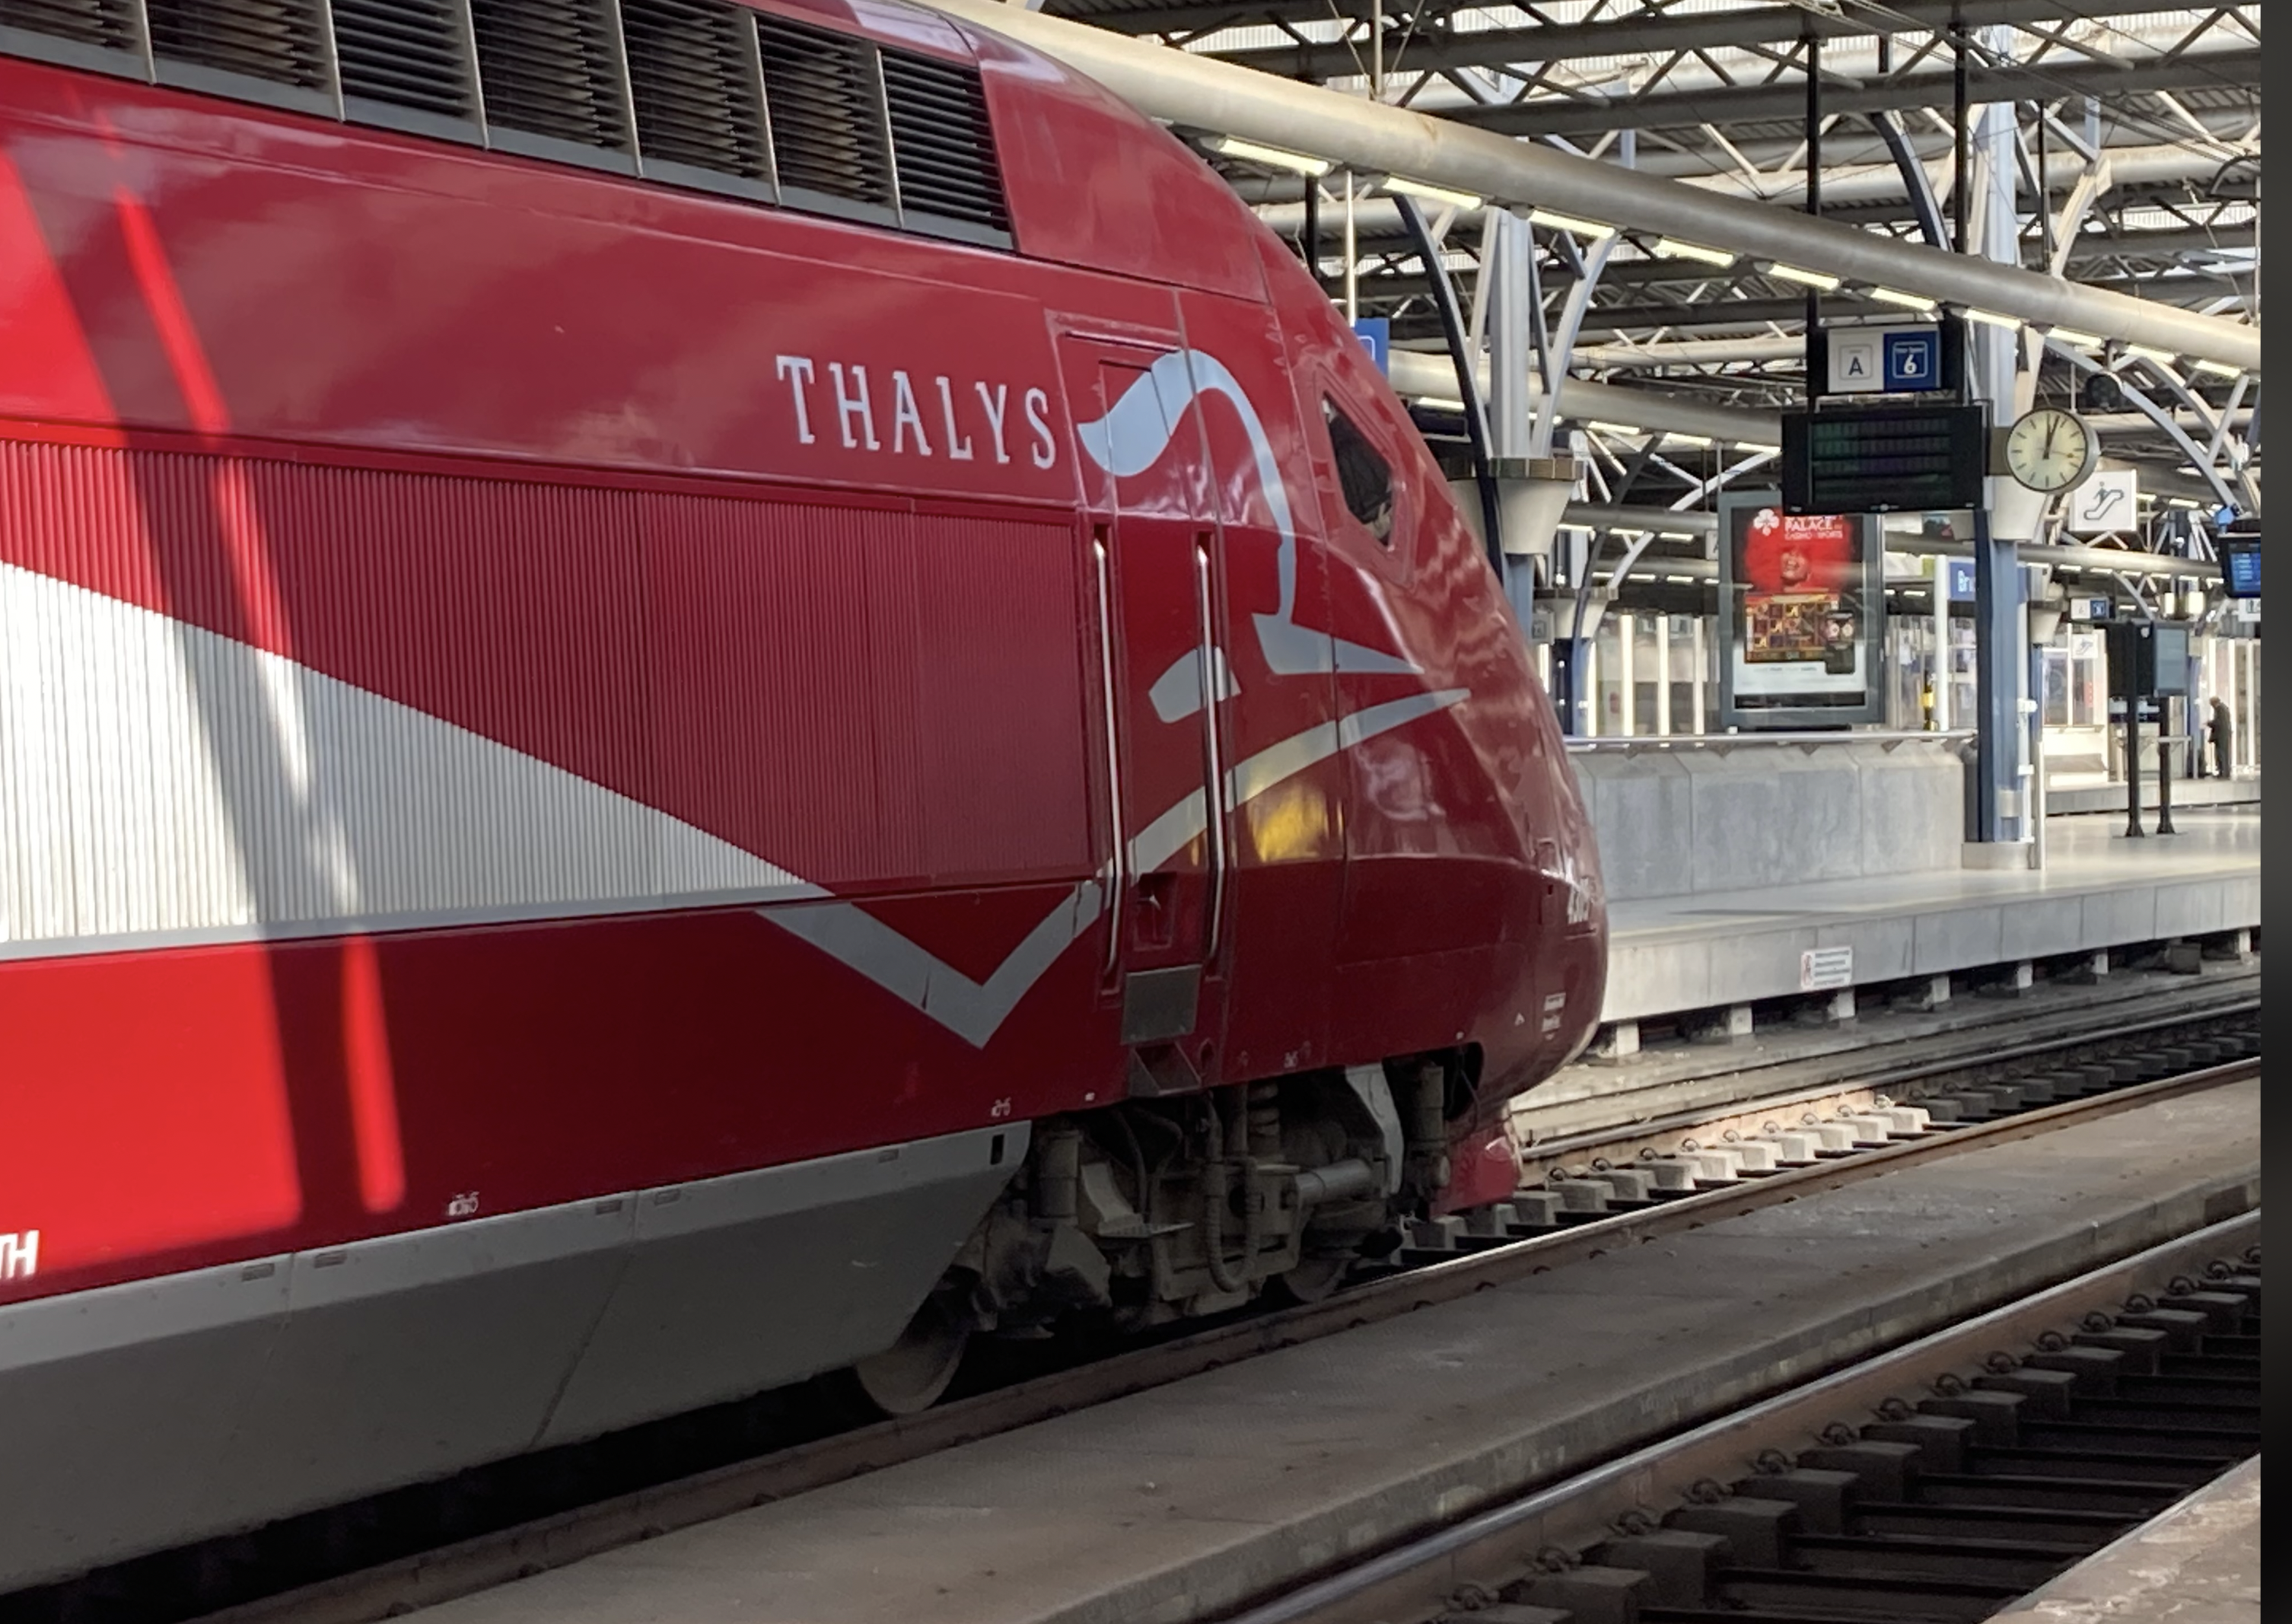 Belgium aims to become international railway hub for sustainable travel in Europe